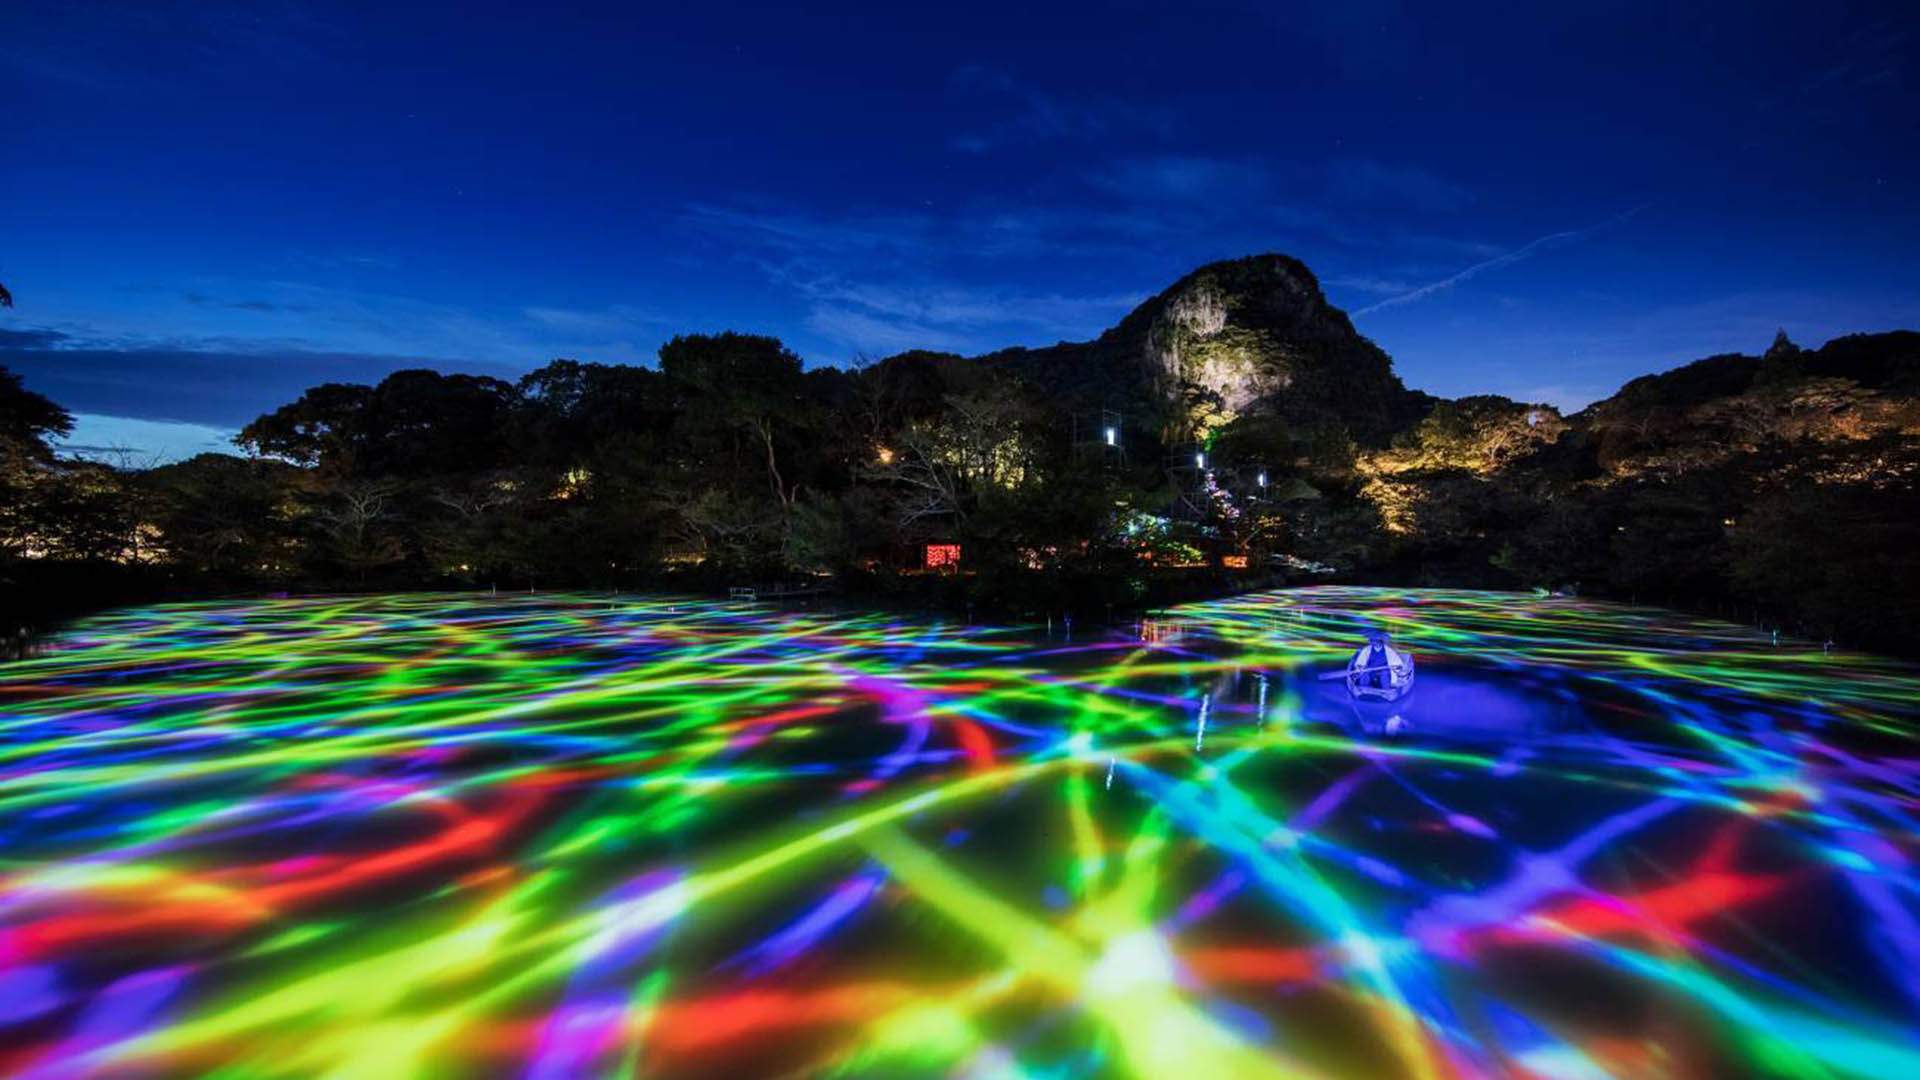 This Eye-Popping Installation Turns Japanese Hot Springs Into a Vivid Interactive Art Playground